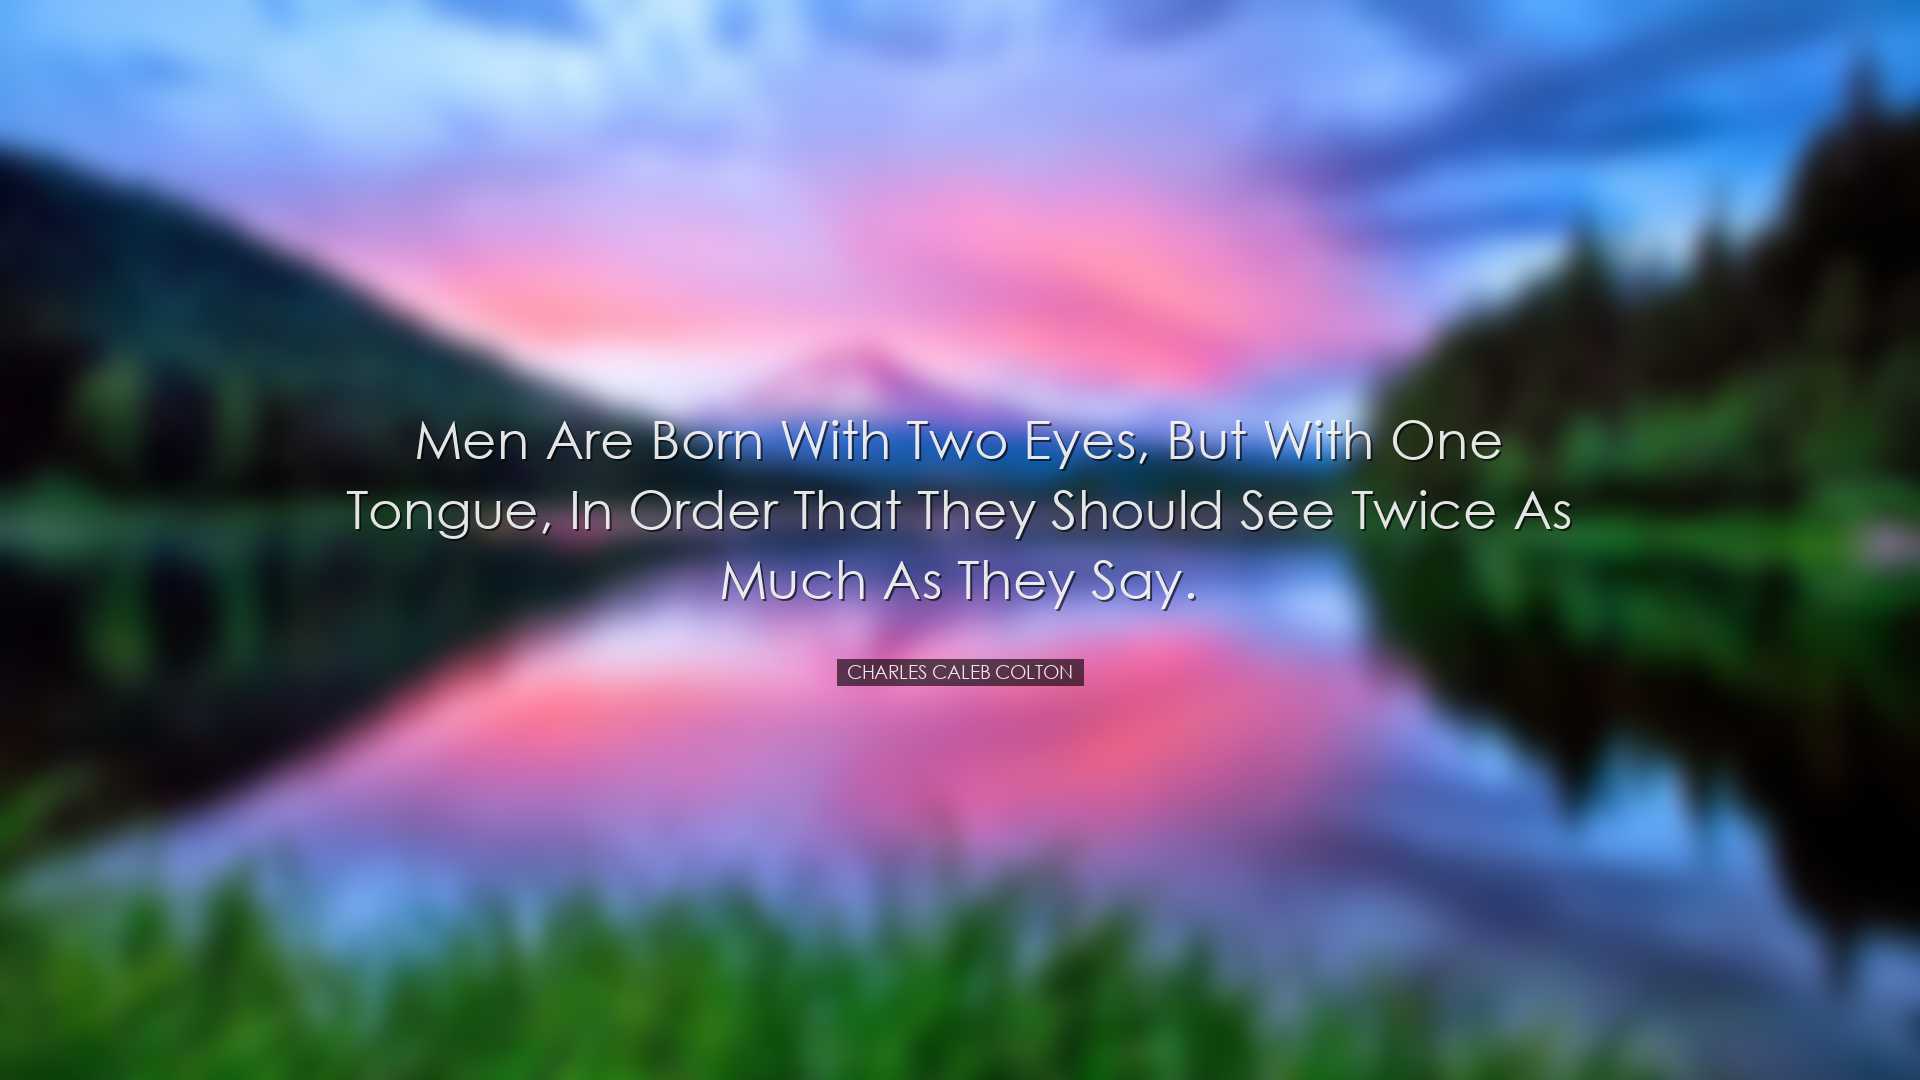 Men are born with two eyes, but with one tongue, in order that the